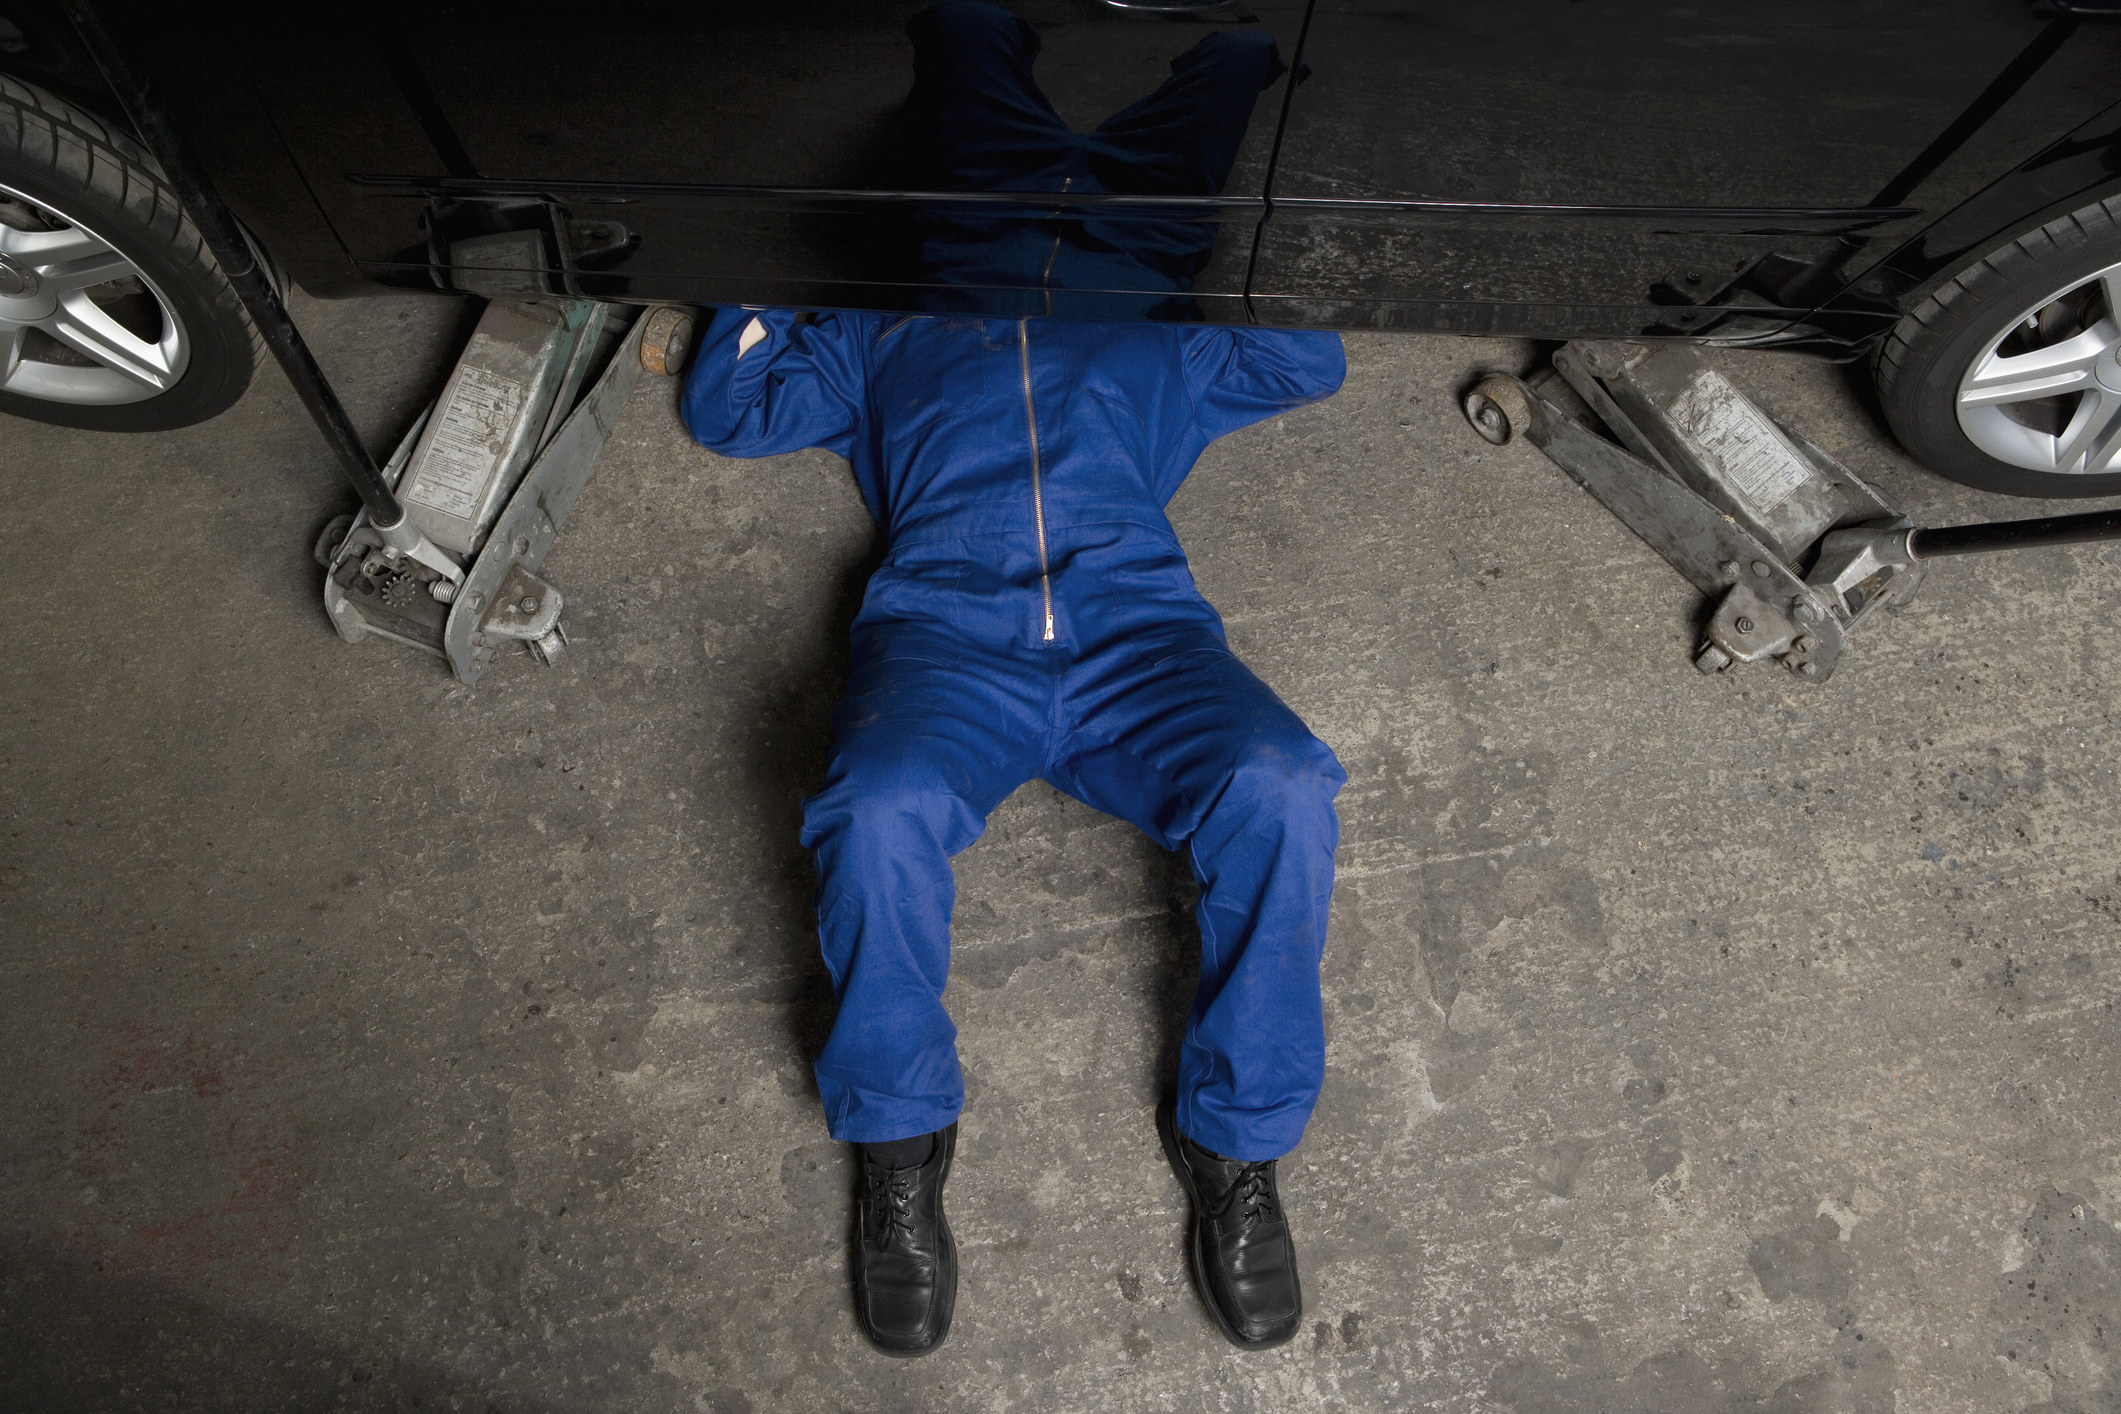 Top view of the torso and legs of a person in a worksuit and boots underneath a vehicle supported by jacks on either end